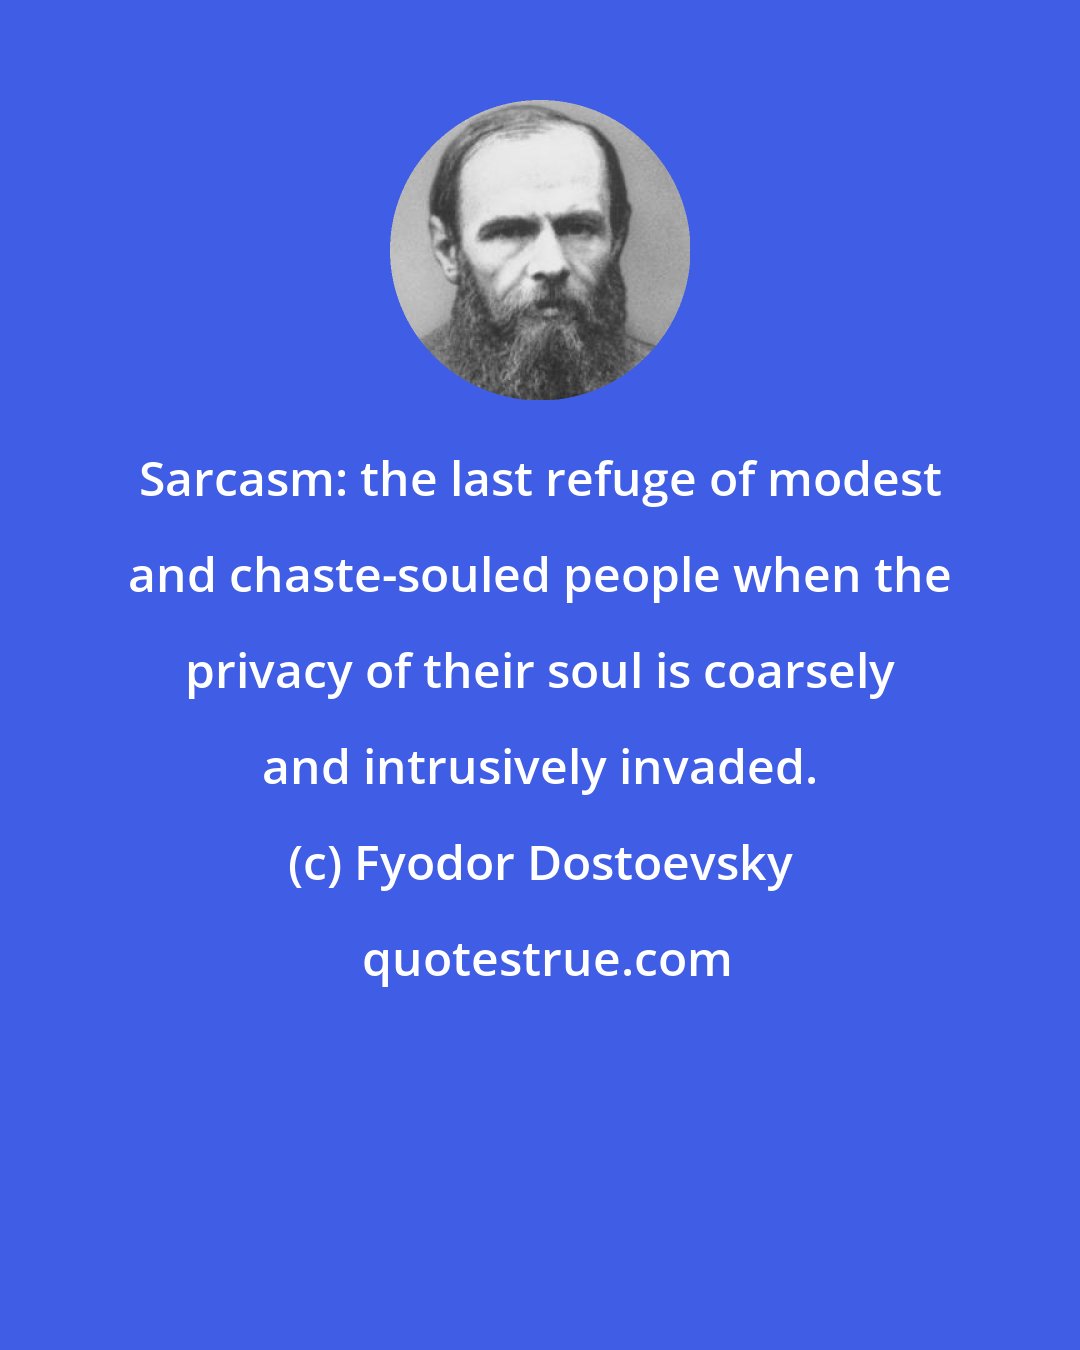 Fyodor Dostoevsky: Sarcasm: the last refuge of modest and chaste-souled people when the privacy of their soul is coarsely and intrusively invaded.